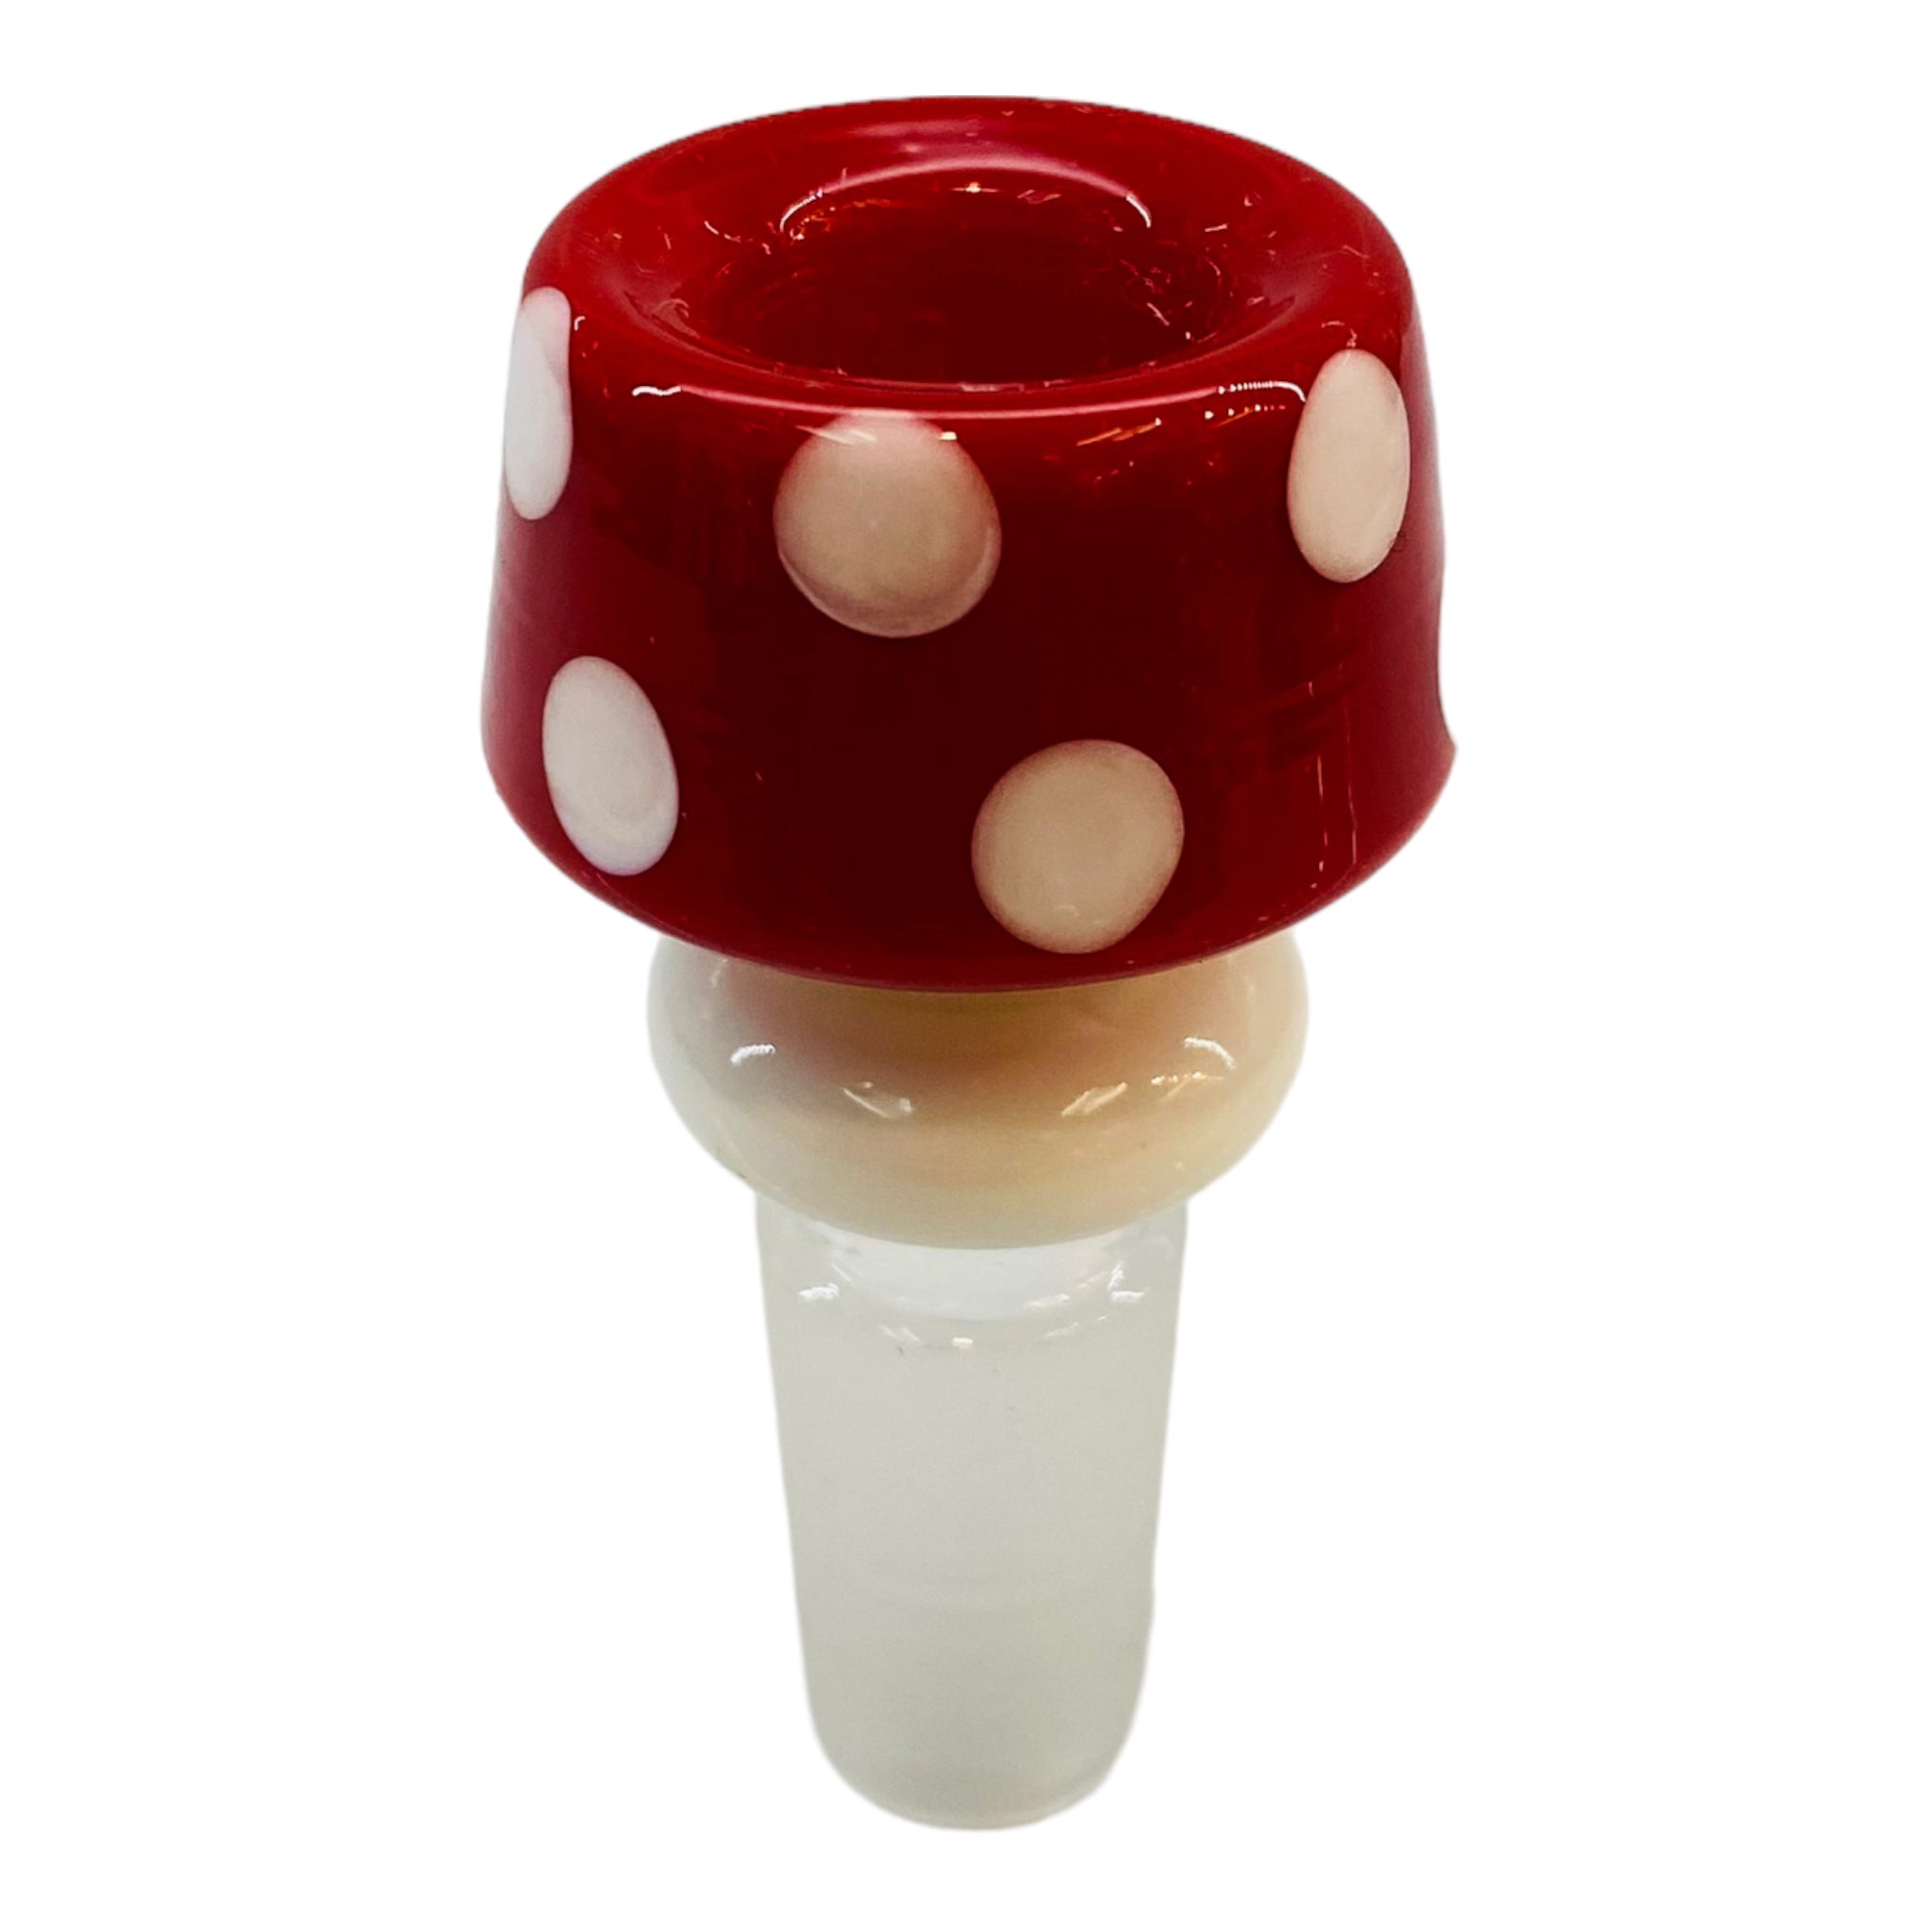 14mm Flower Bowl - Mushroom Cap Bong Bowl Piece - Red And White